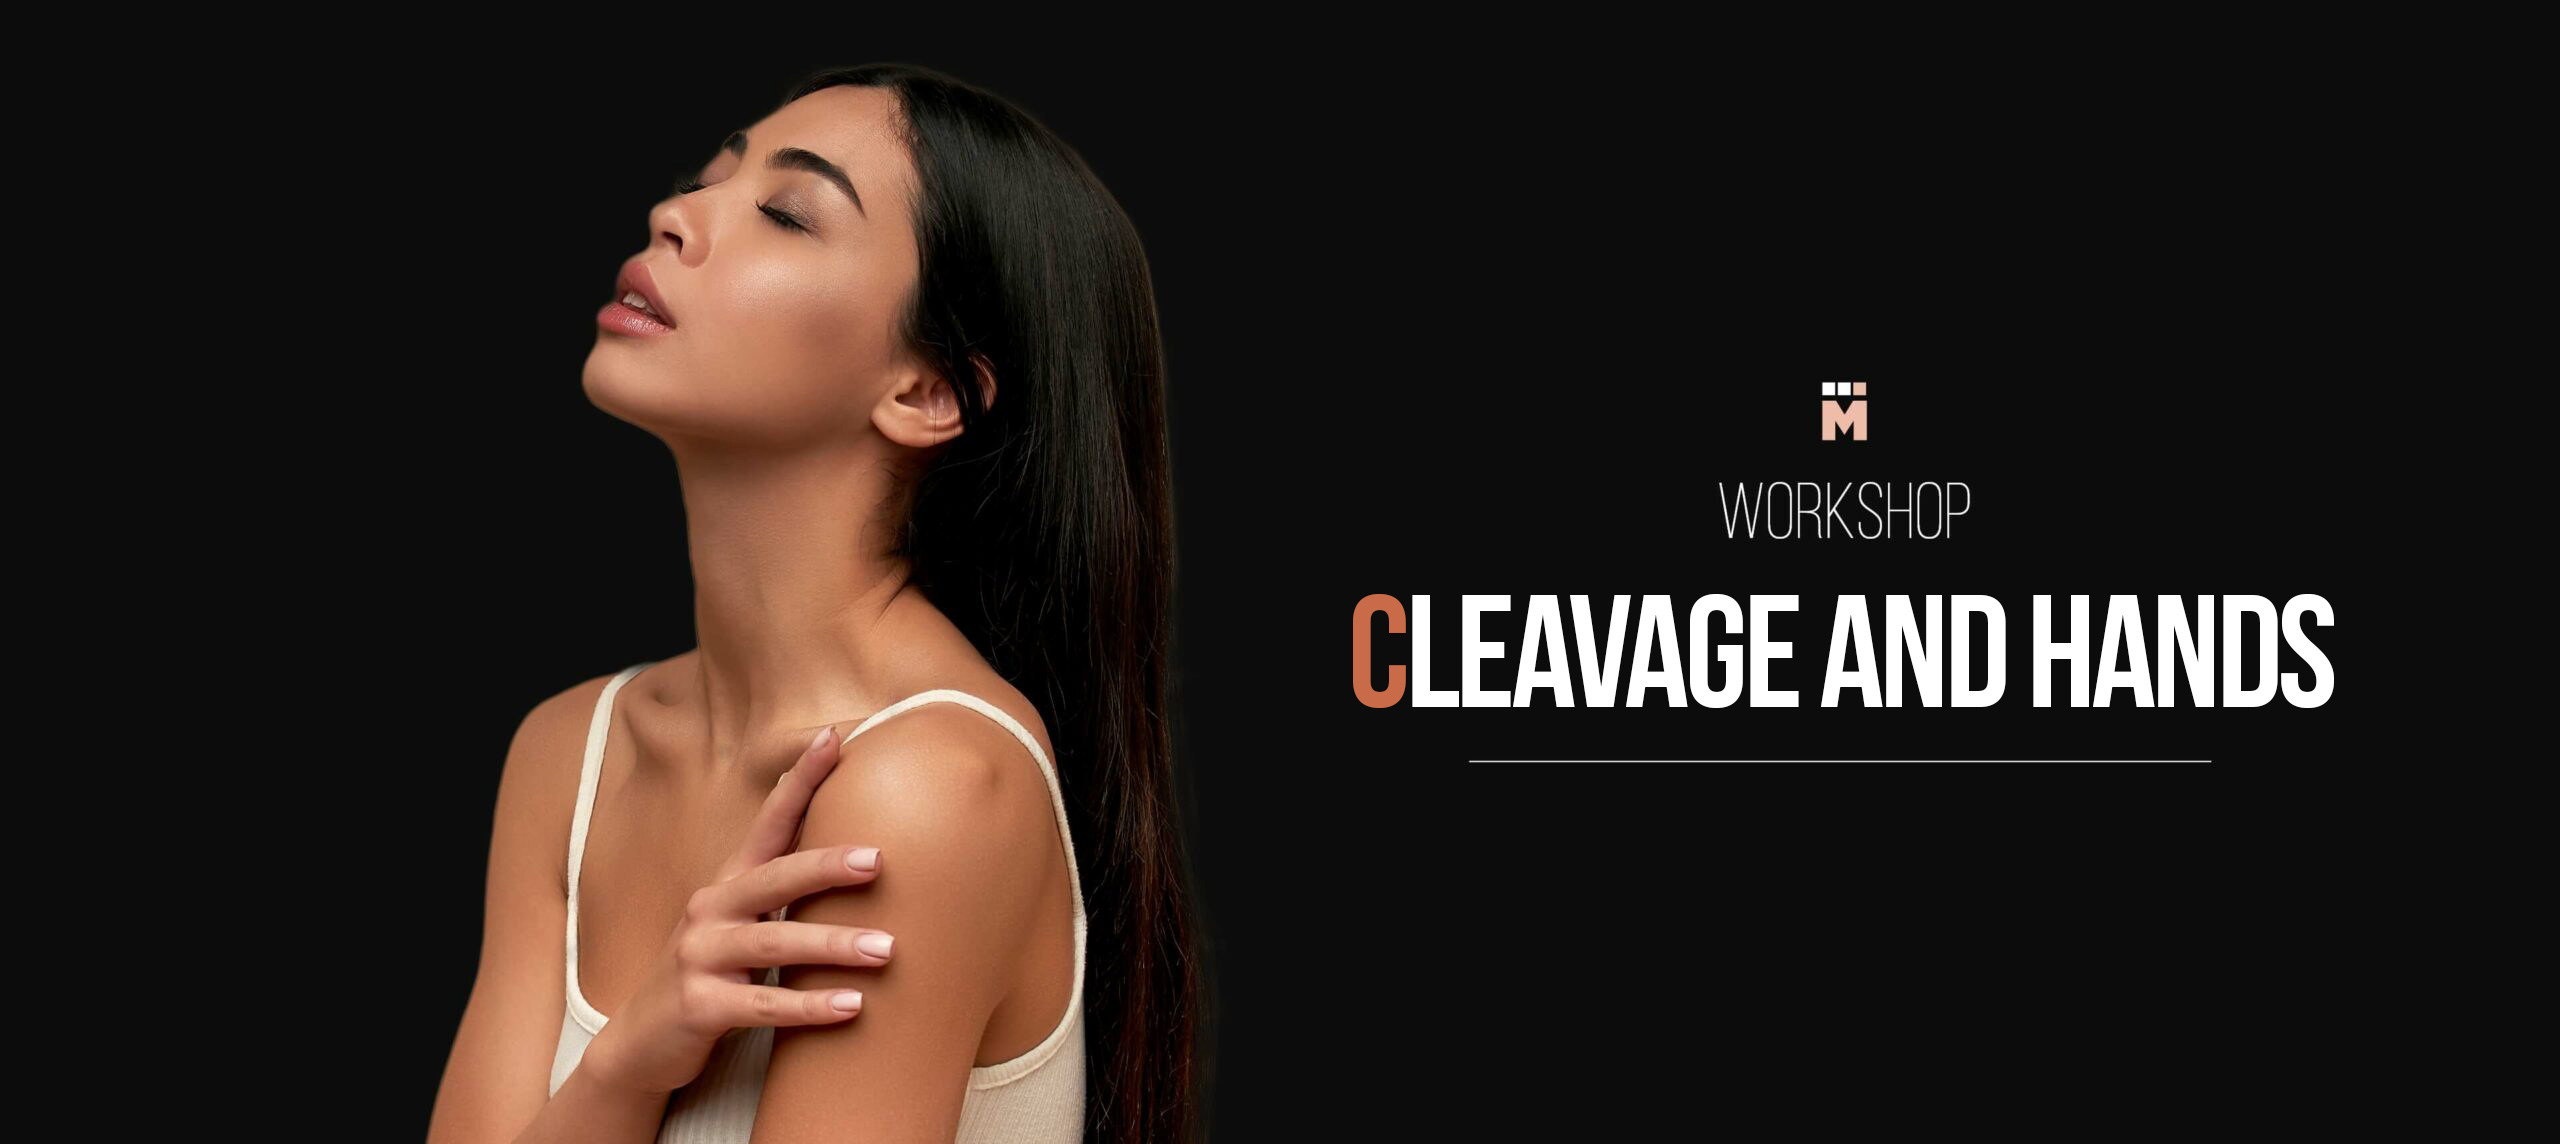 Medical-casting-agency-model-recruiting-workshop-cleavage-and-hands